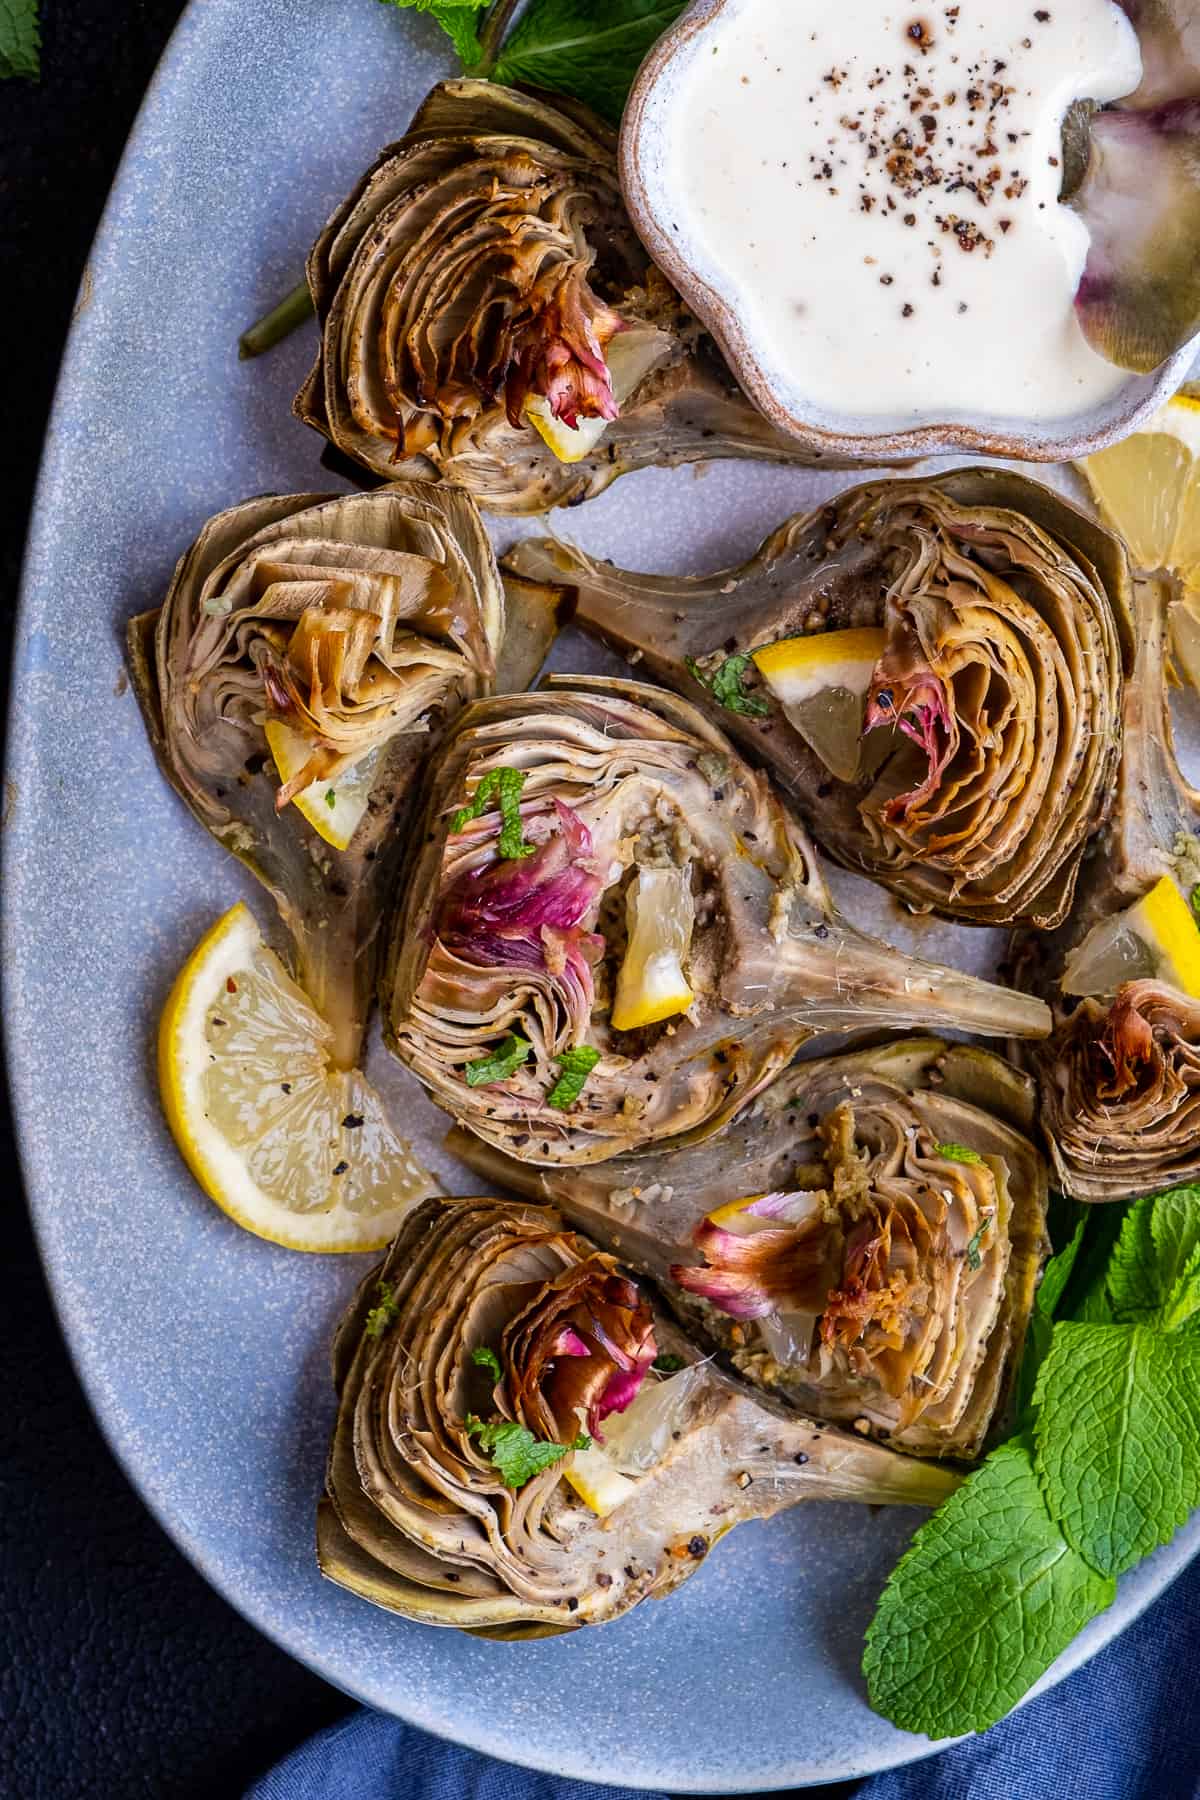 Oven roasted artichokes served on an oval plate with a bowl of dipping sauce on the side.